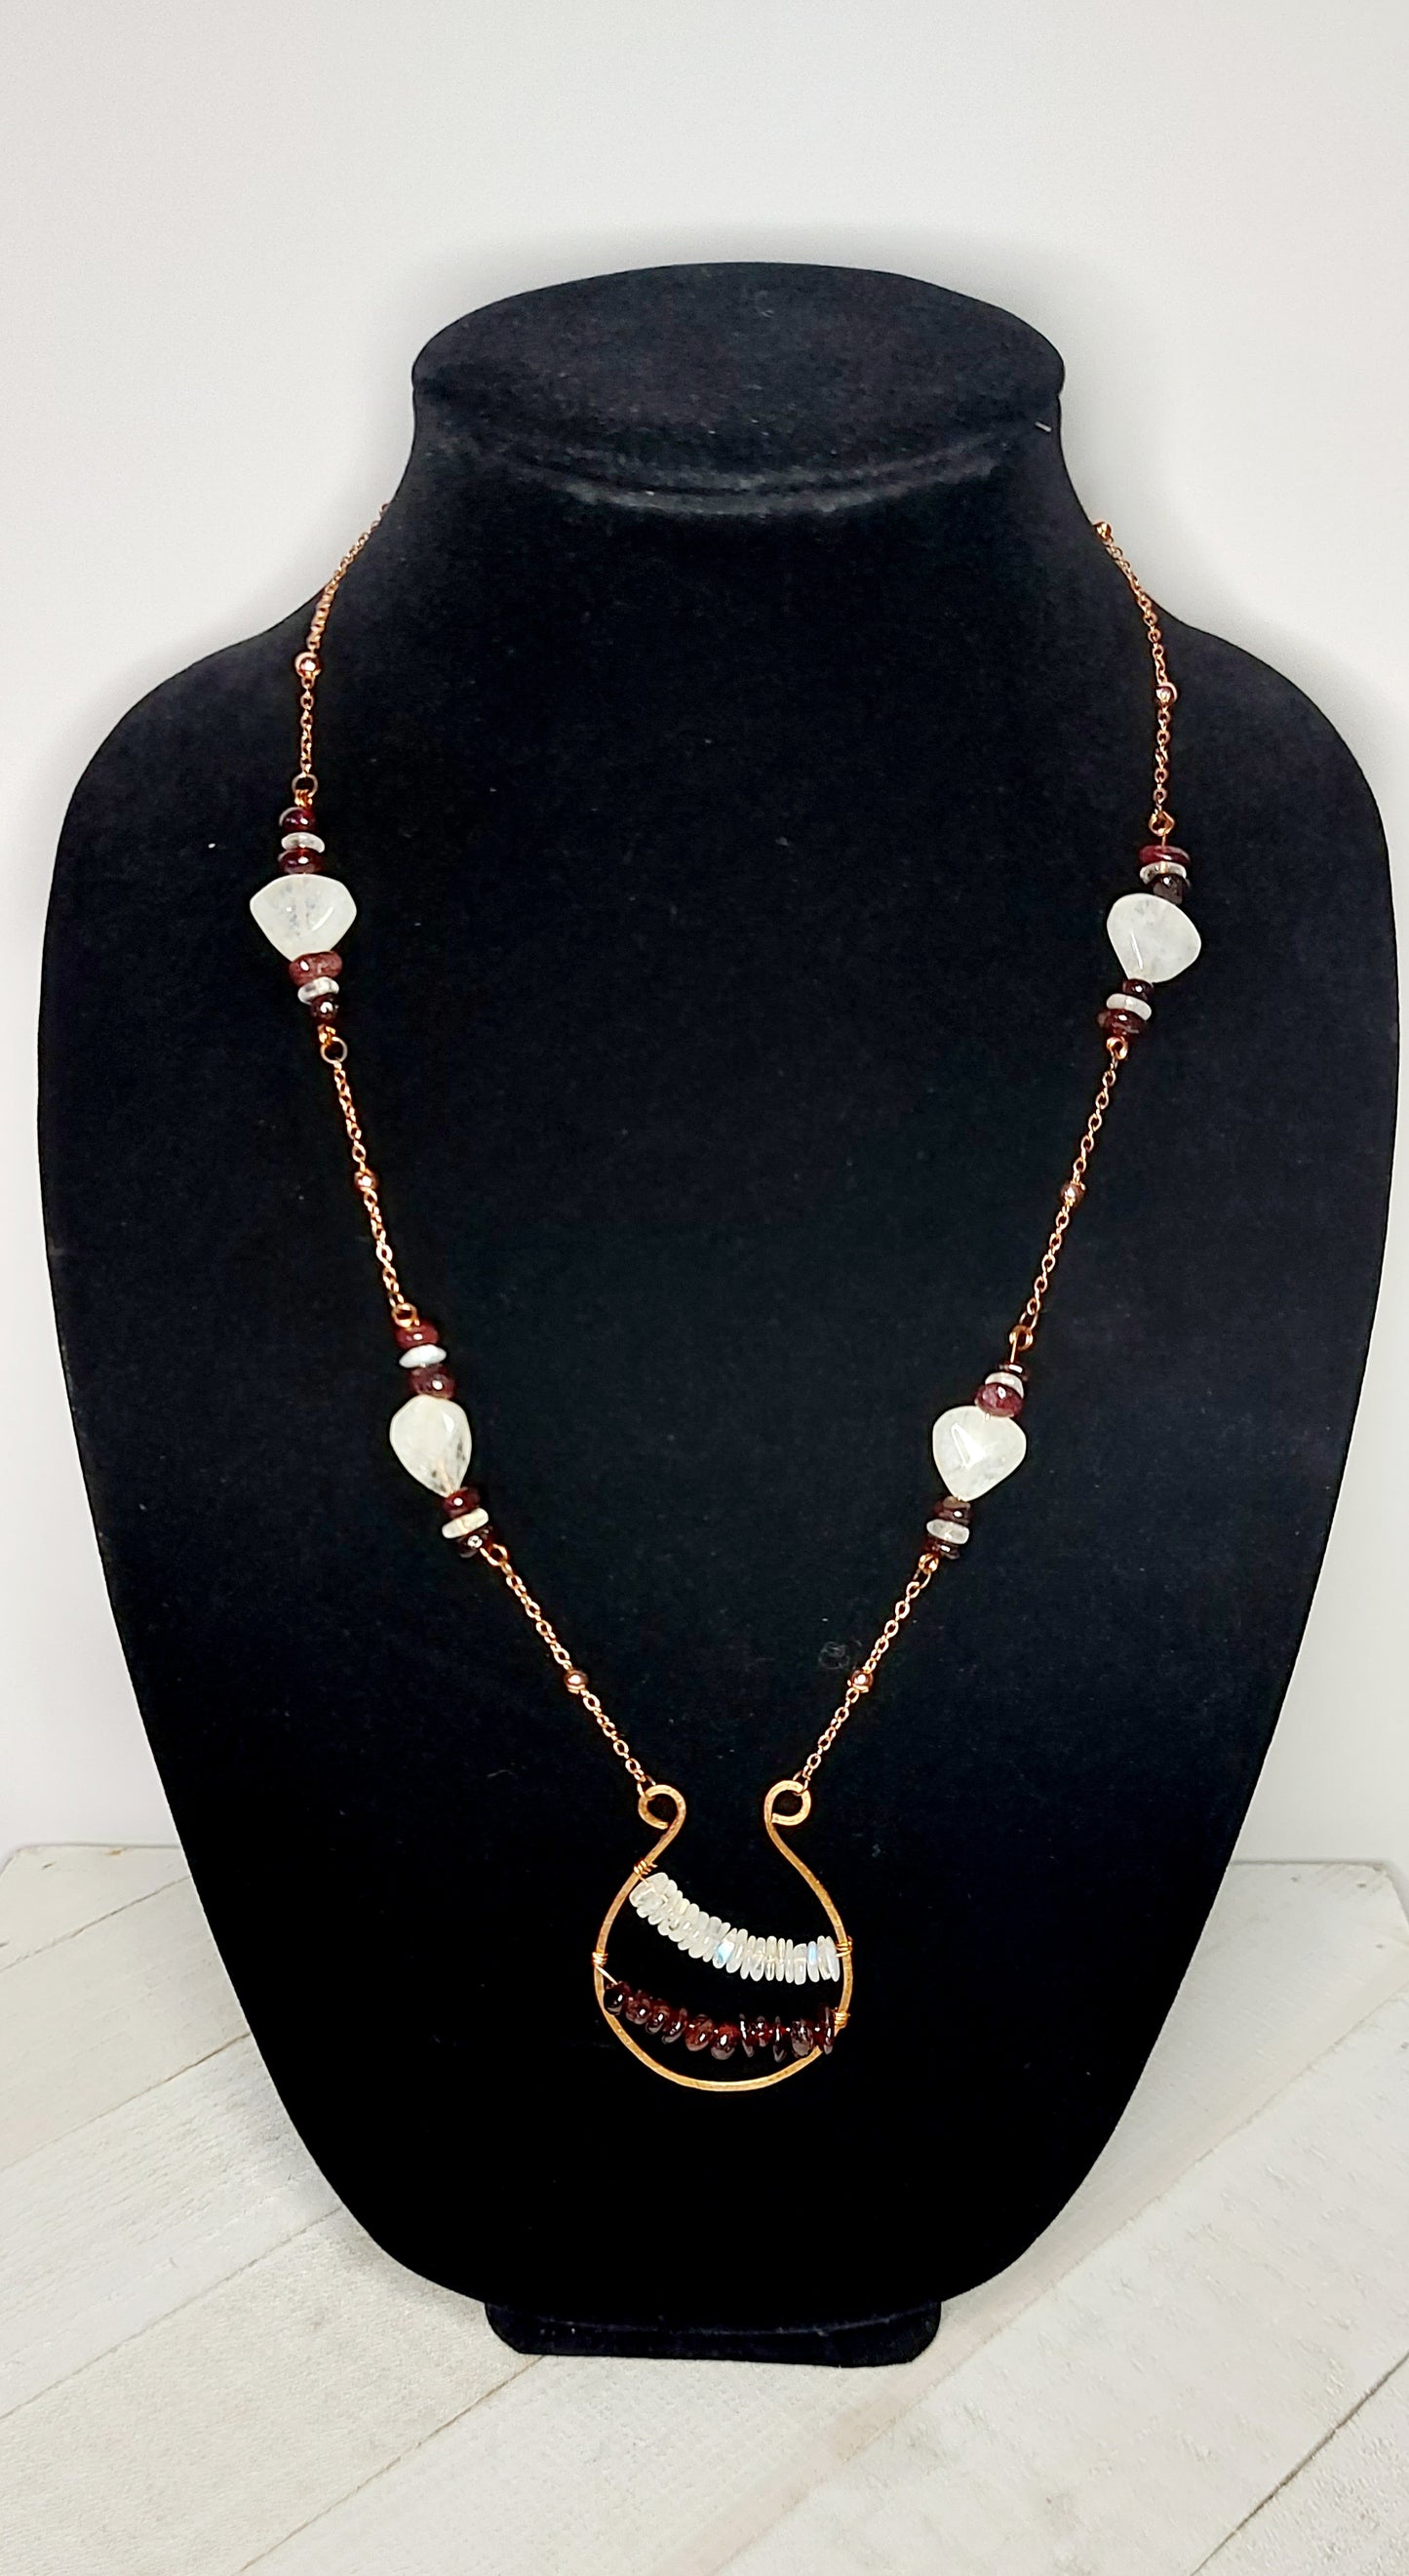 Rainbow Moonstone and Garnet Copper Necklace